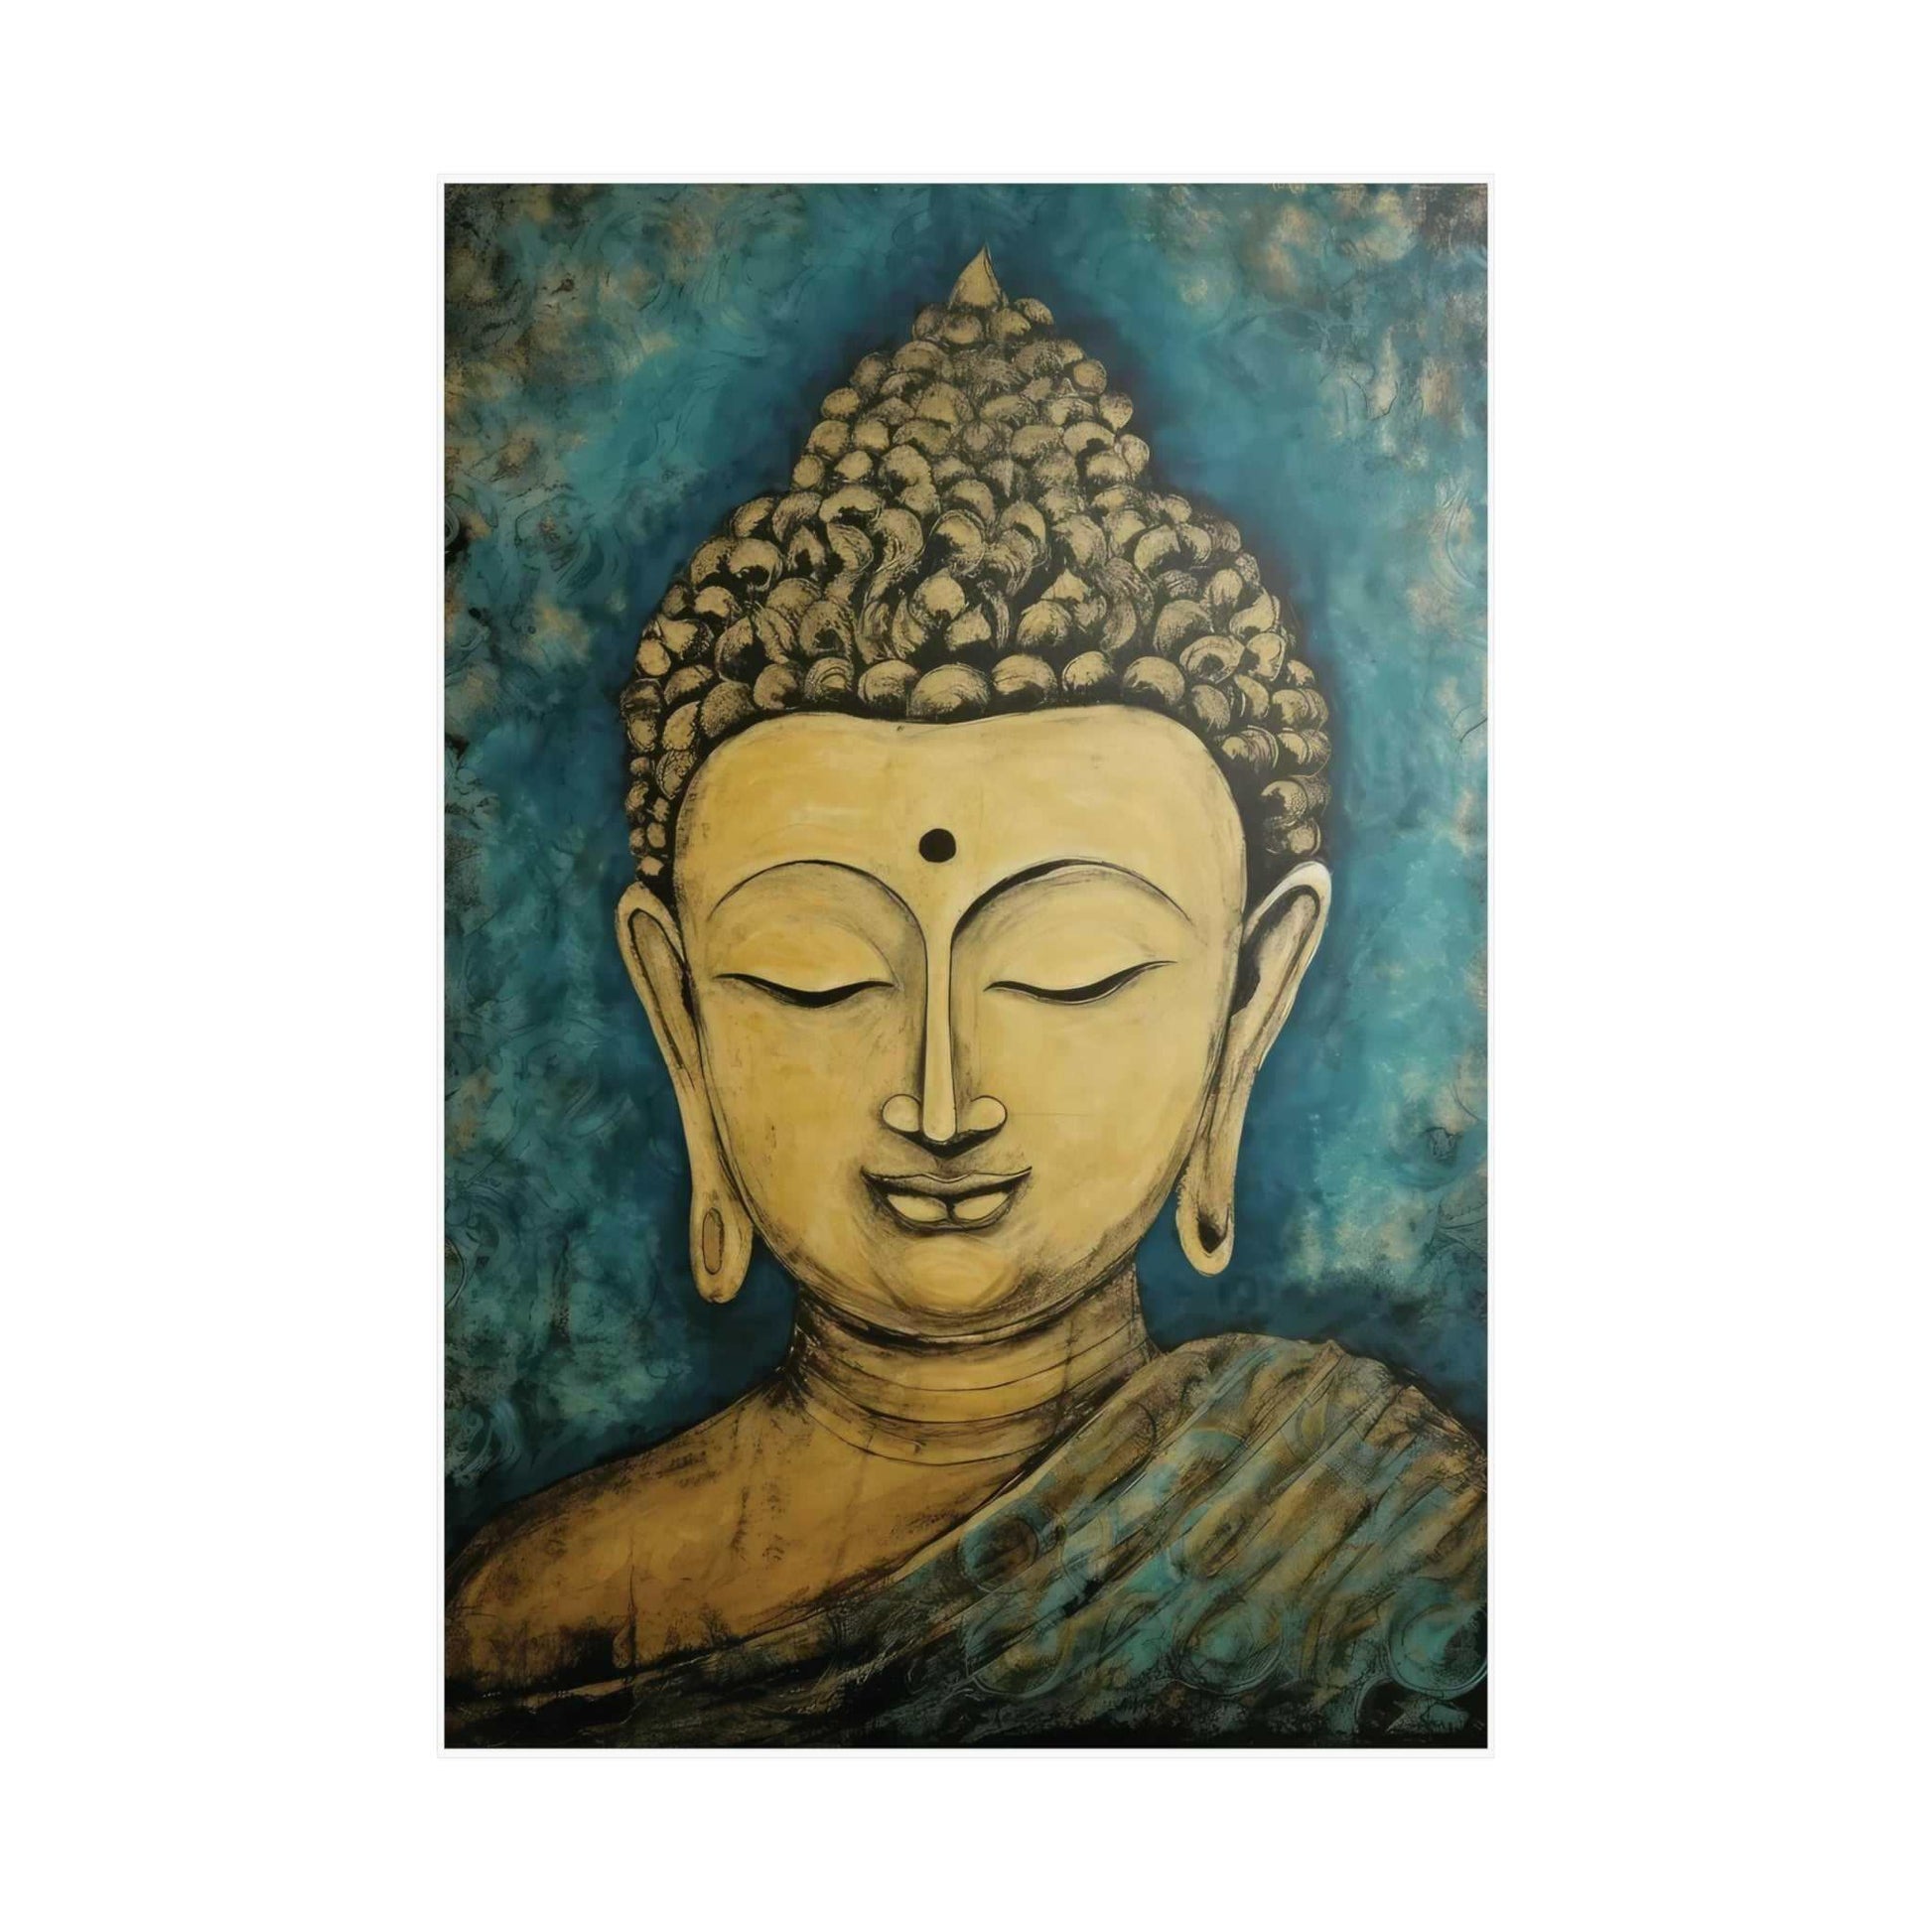 ZenArtBliss.com's Kentucky Buddha in Art, featuring a golden Buddha Head against a teal background on matte paper, embodying peace and wisdom.